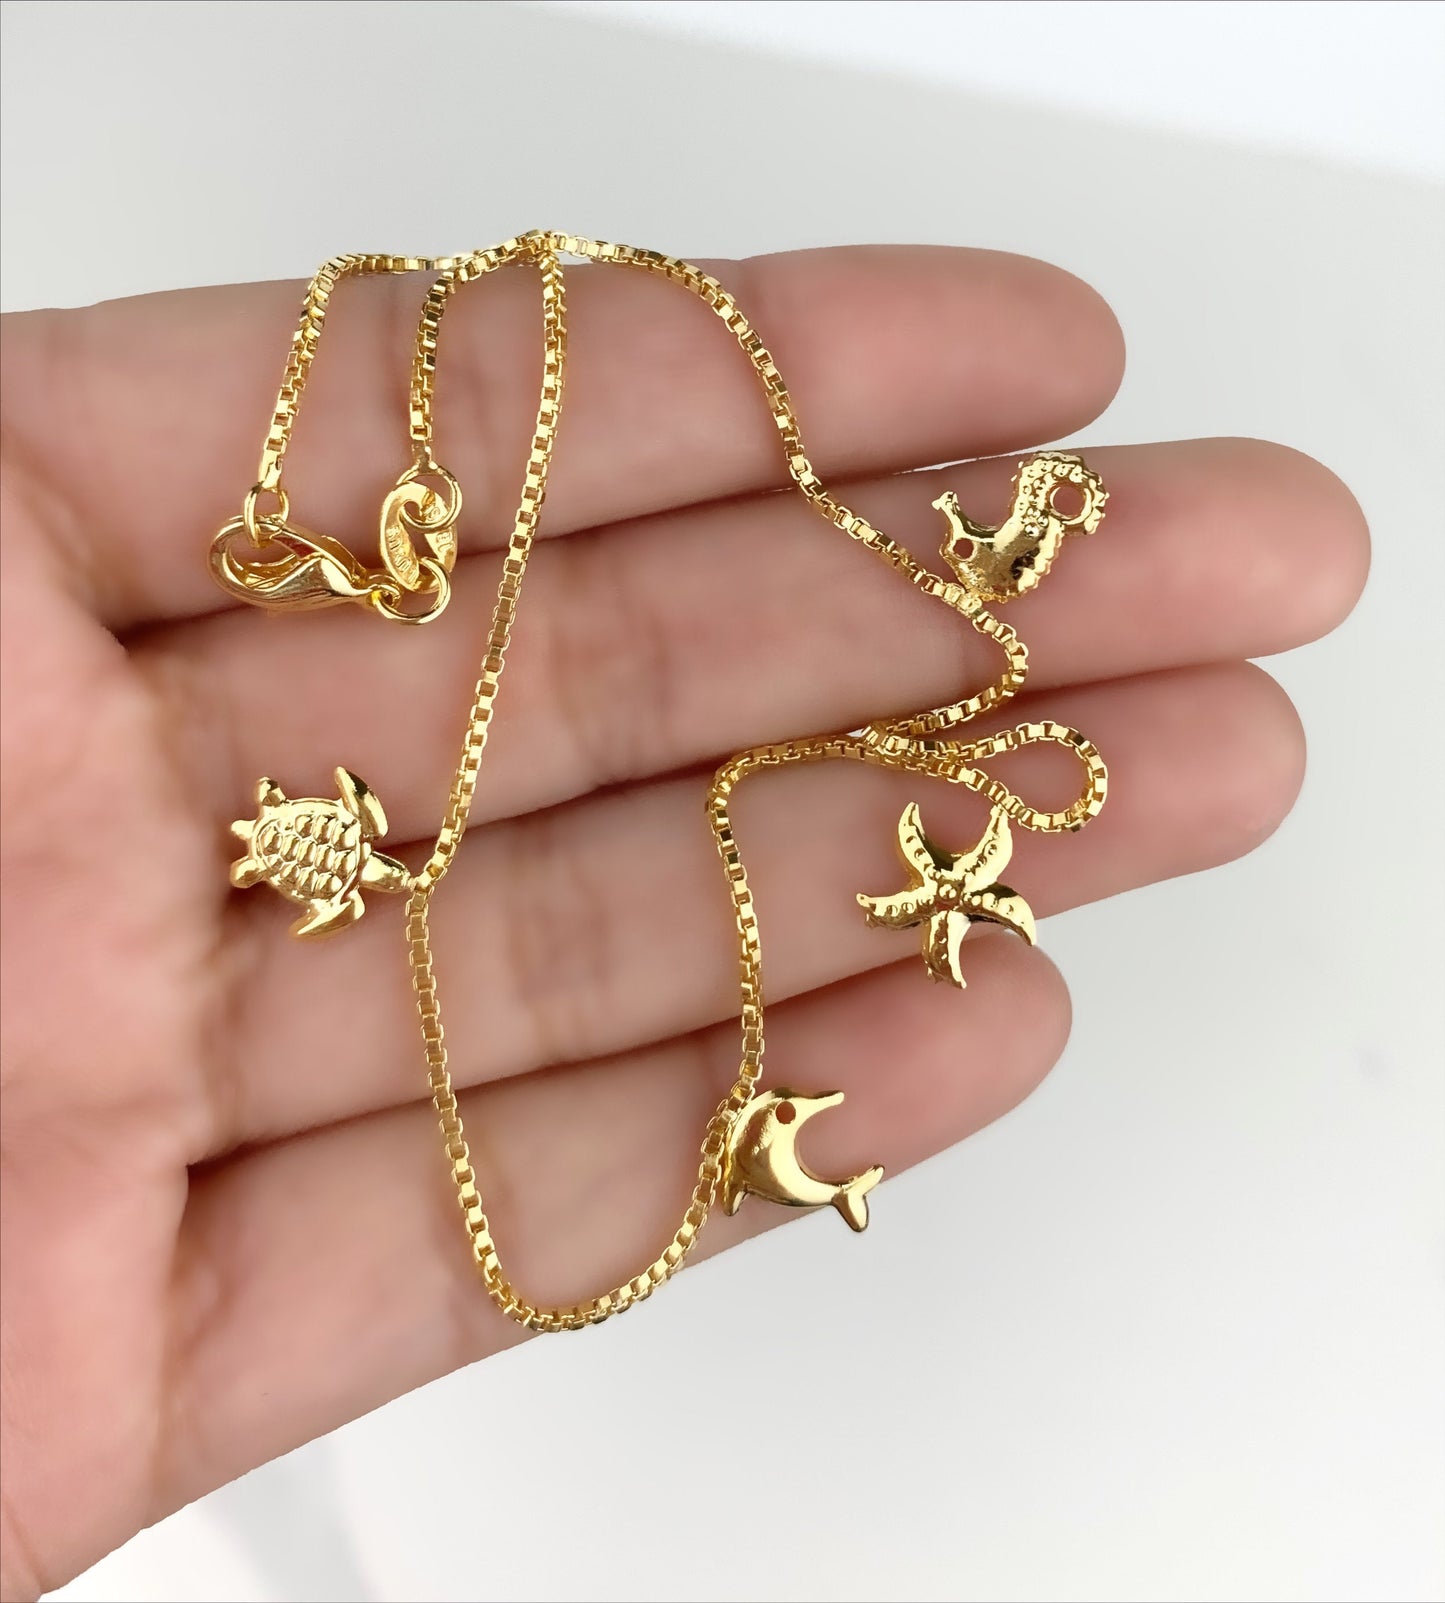 18k Gold Filled 1mm Box Chain Sea Charms Anklet Wholesale Jewelry Supplies